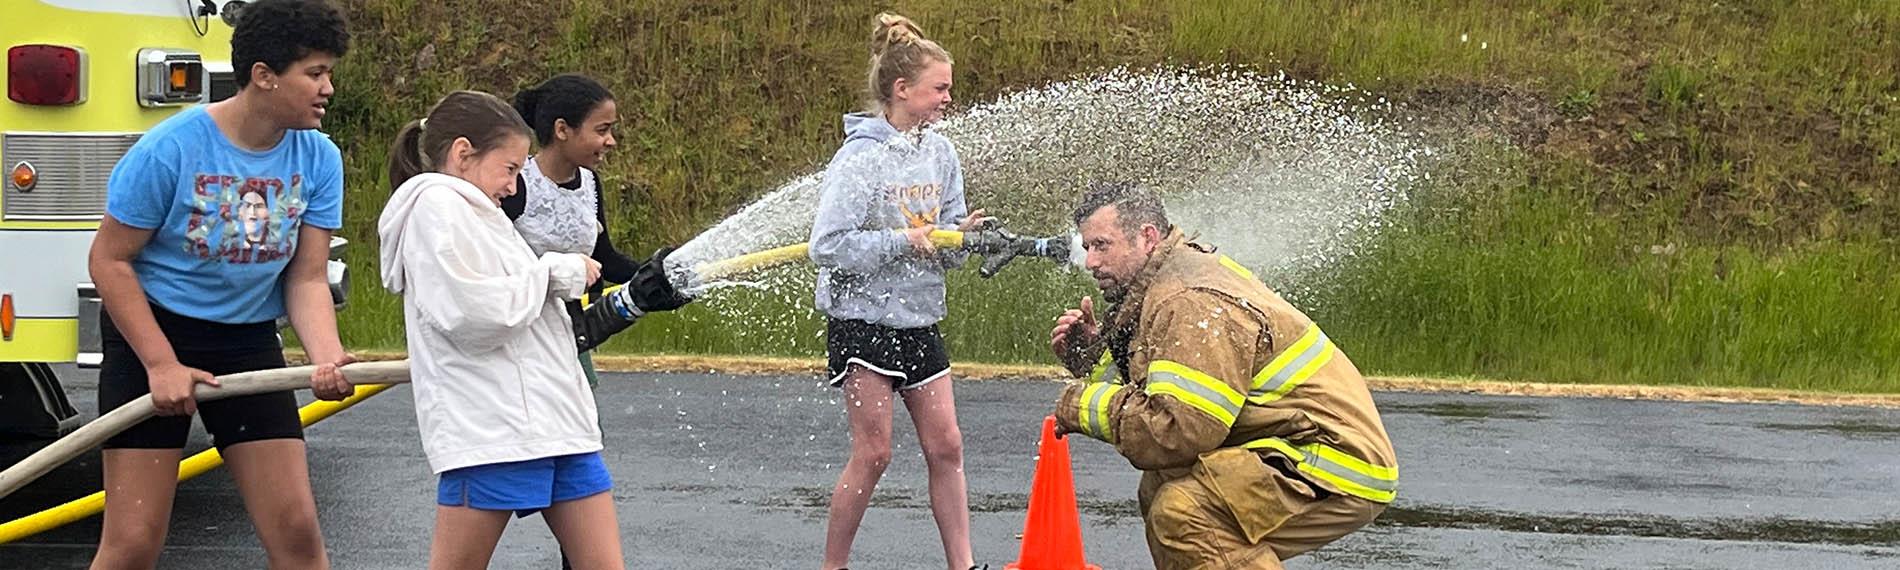 Students use a firehose as directed by a fireman during the HLE Field Day